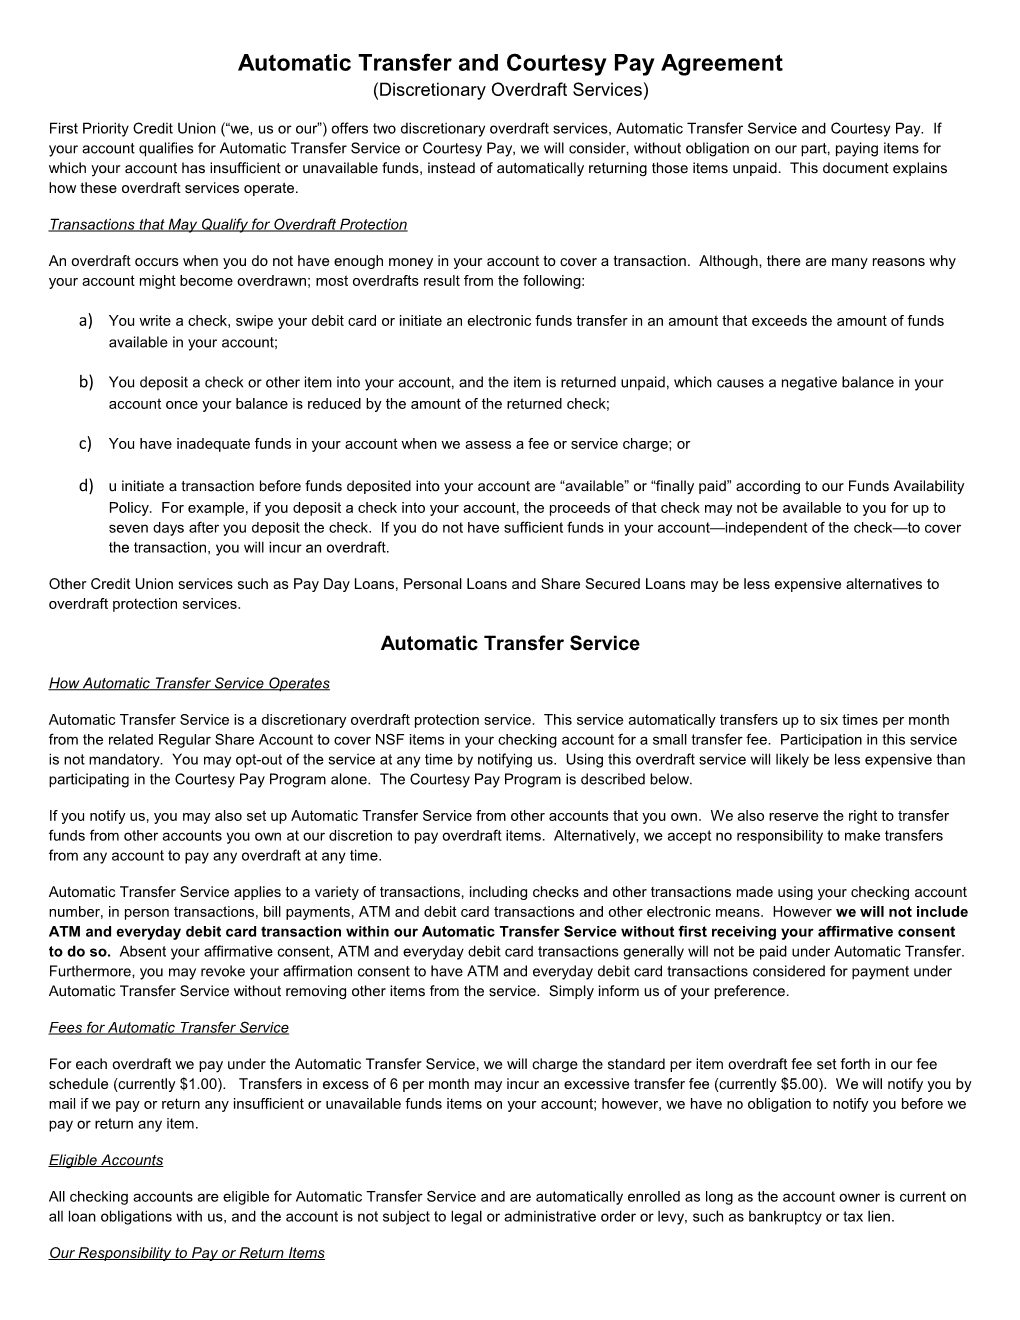 Automatic Transfer and Courtesy Pay Agreement (Discretionary Overdraft Services)